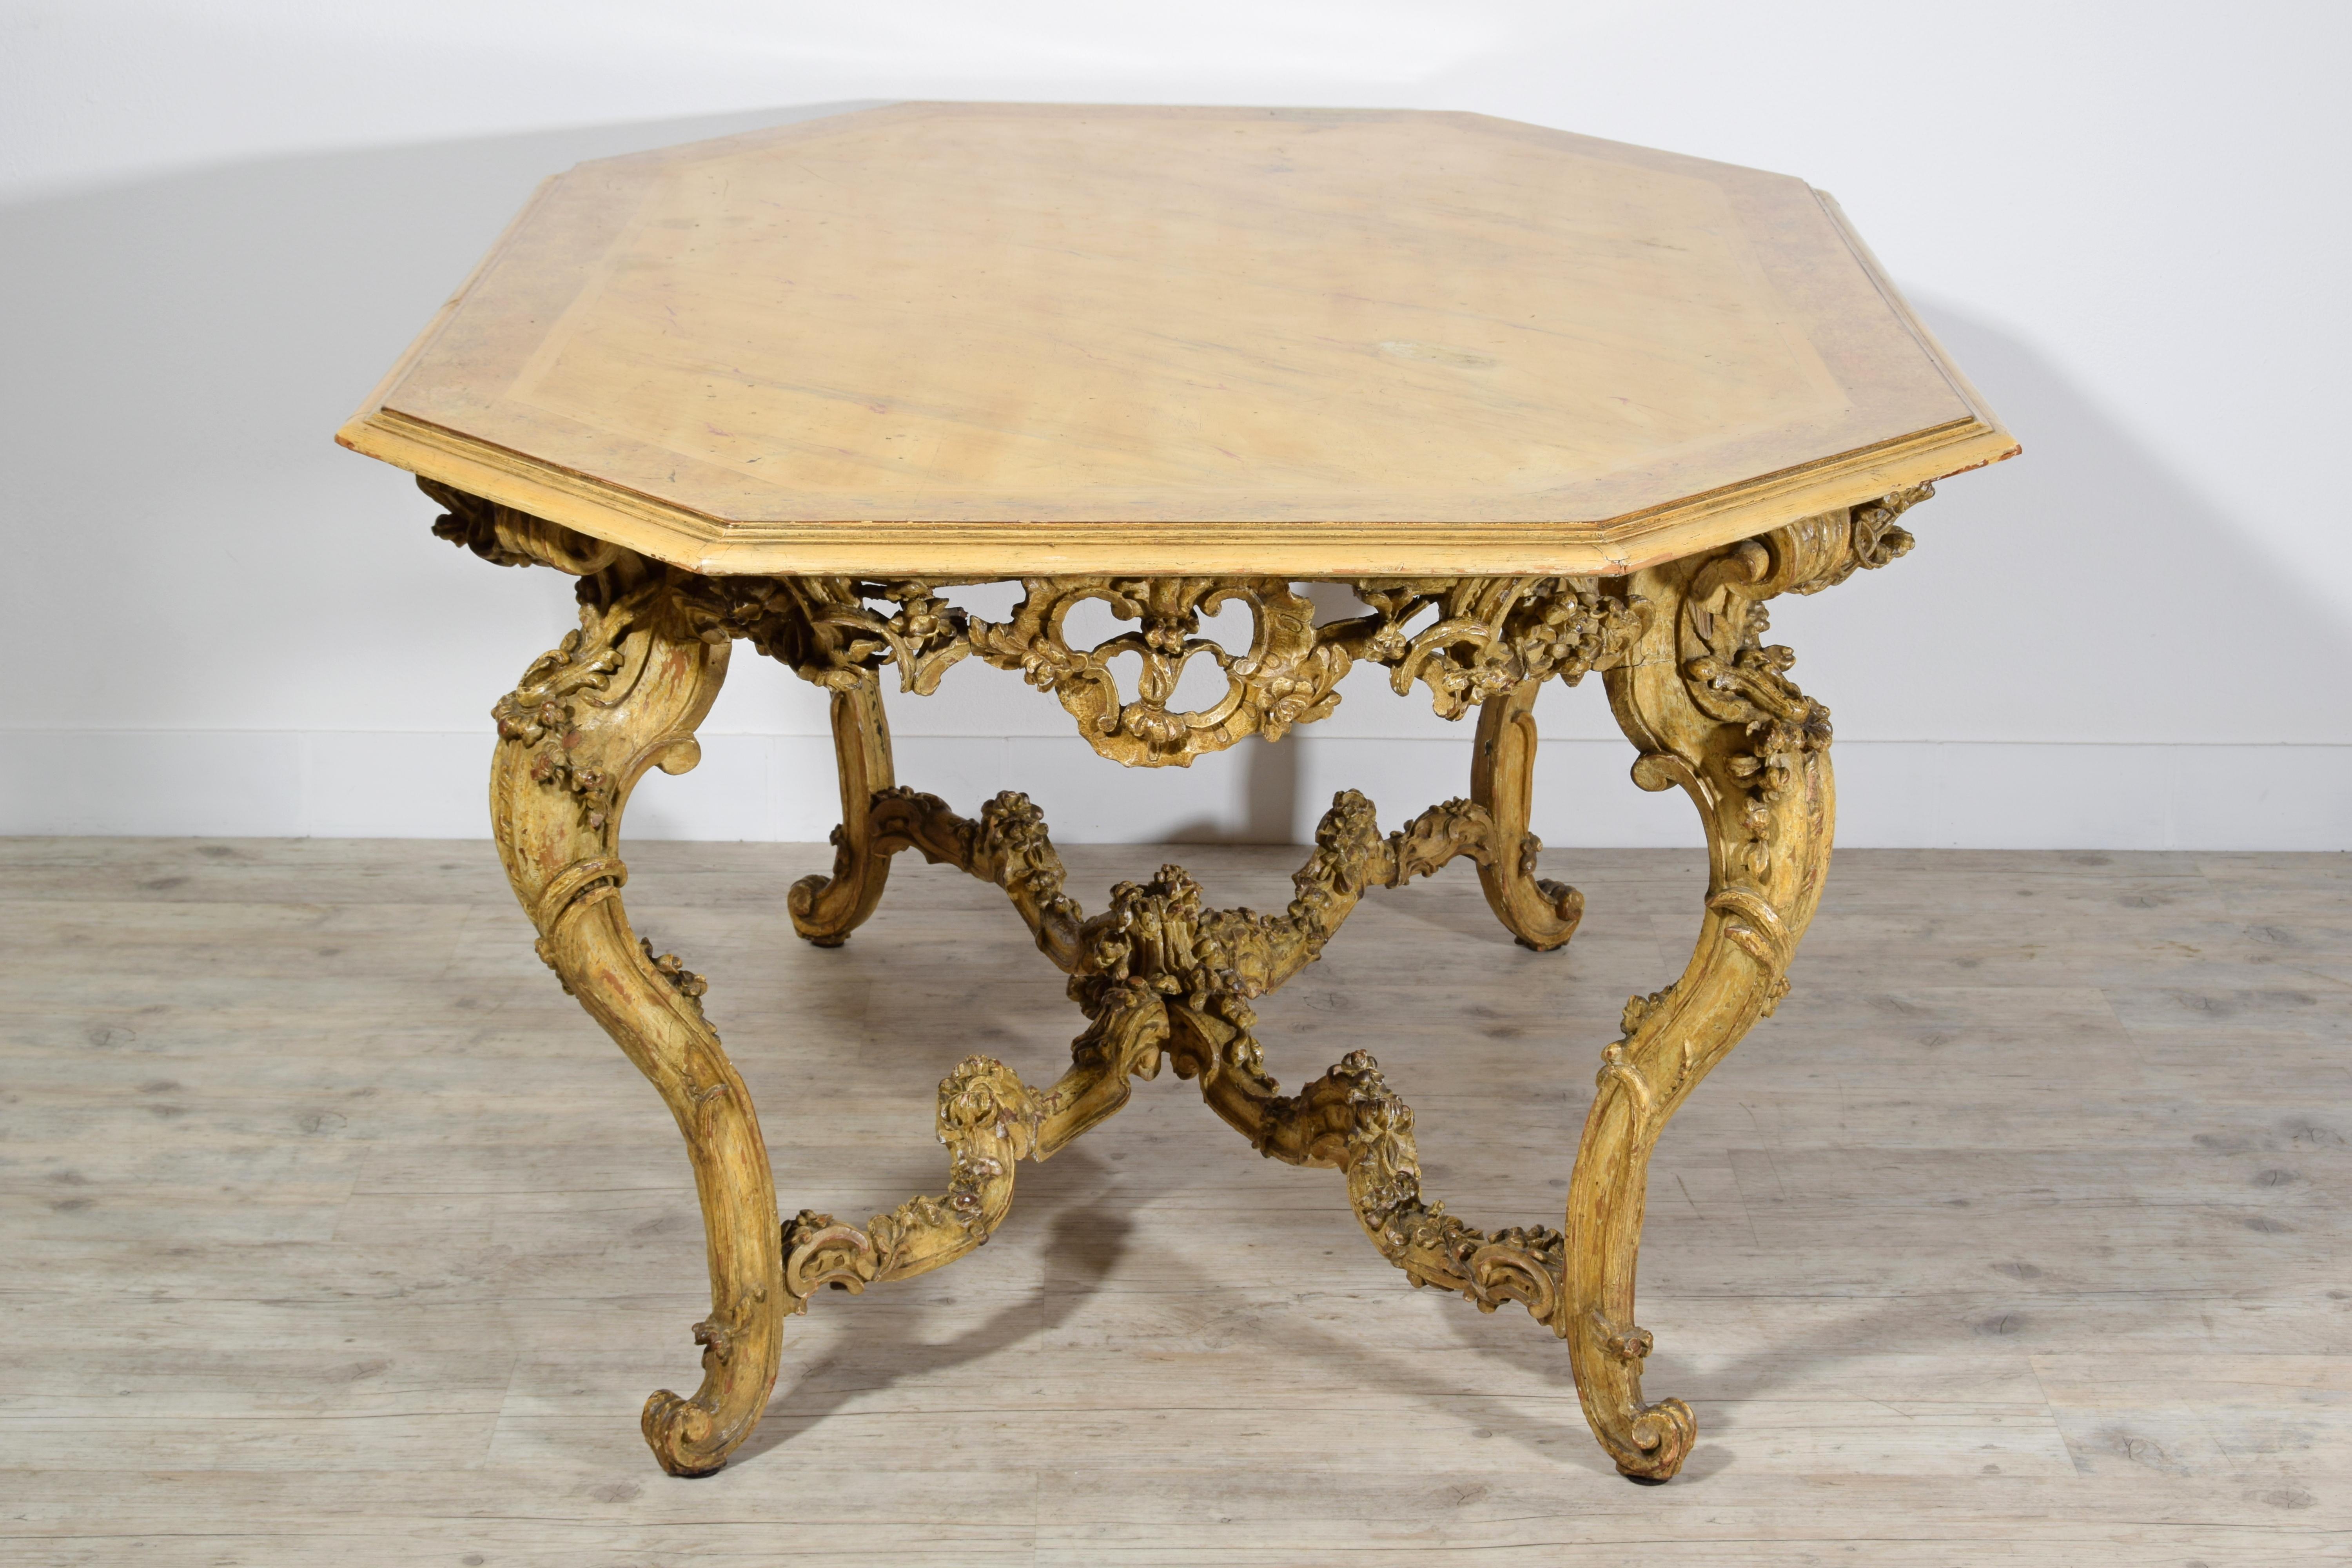 Italian Baroque Carved Gilt and Lacquered Wood Center Table, 18th Century For Sale 6